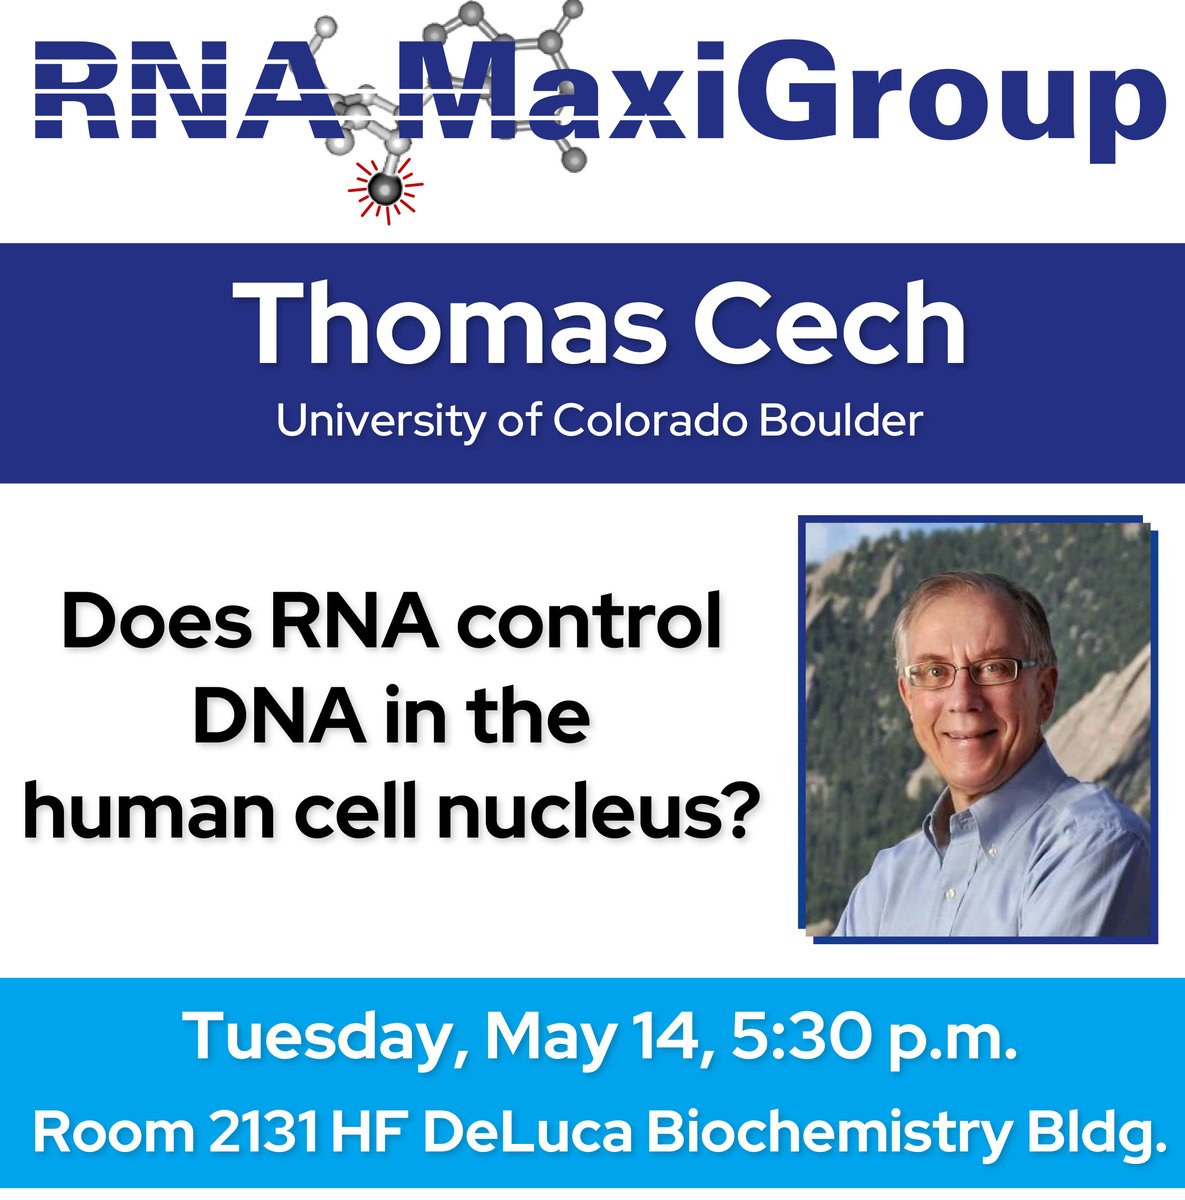 The semester may be over but one last powerhouse RNA Maxigroup is left featuring Tom Cech! Usual time and place plus a special bonus seminar on Wednesday! Thanks to @RNASociety for funding along with @UWBiochem @BMC_UW @CMB_UWMadison !